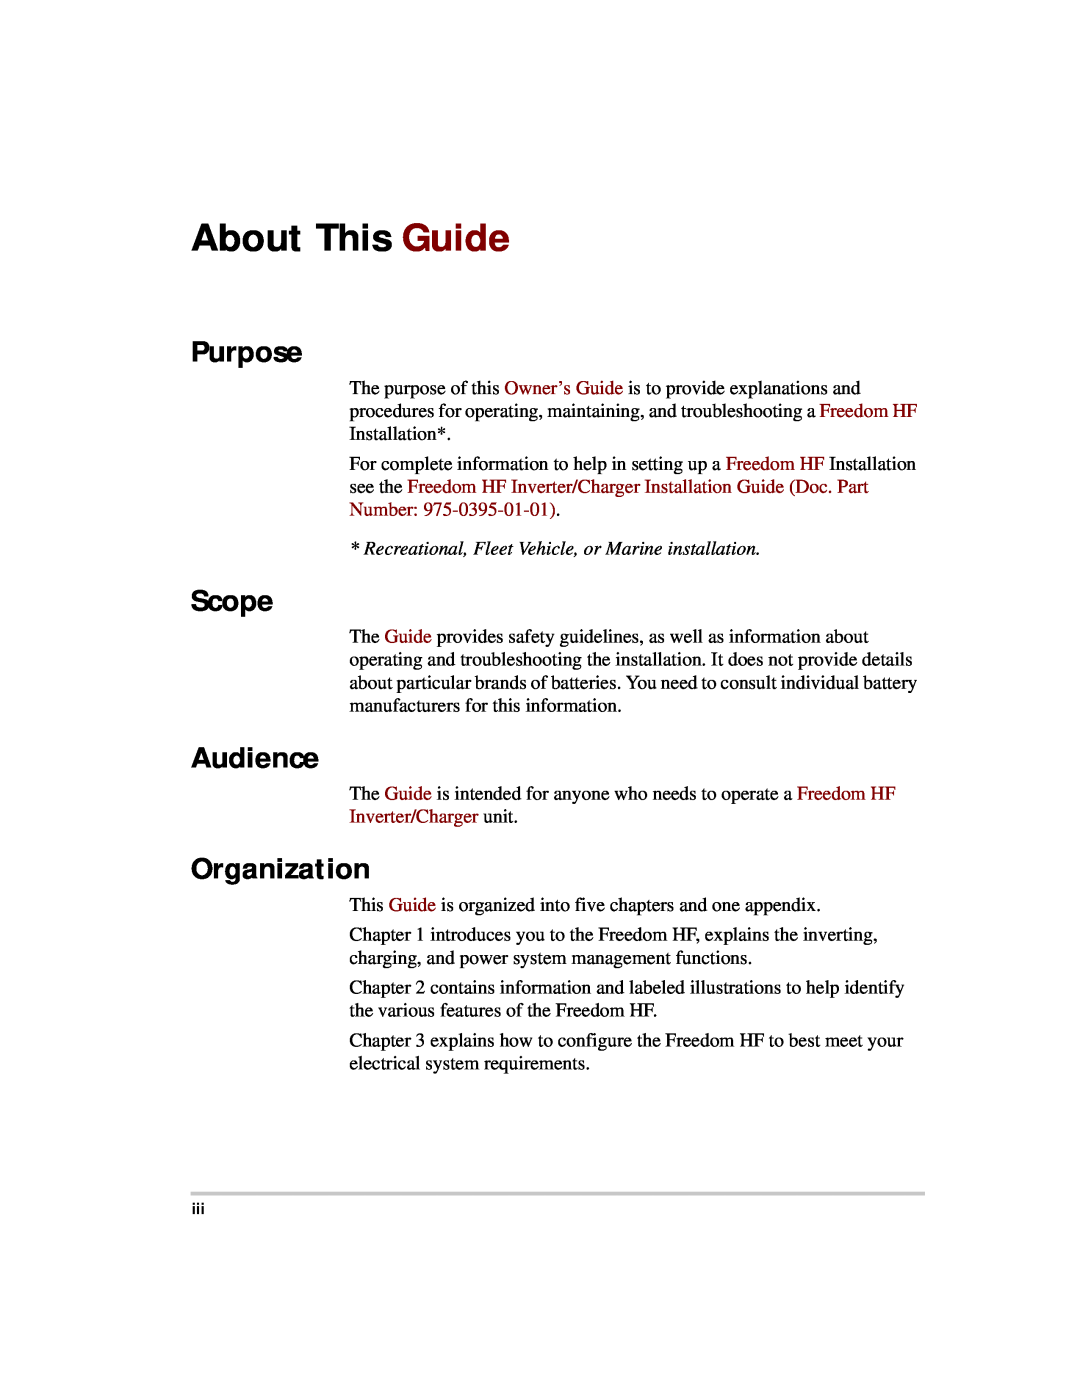 Xantrex Technology HF 1800, HF 1000 manual About This Guide, Purpose, Scope, Audience, Organization 